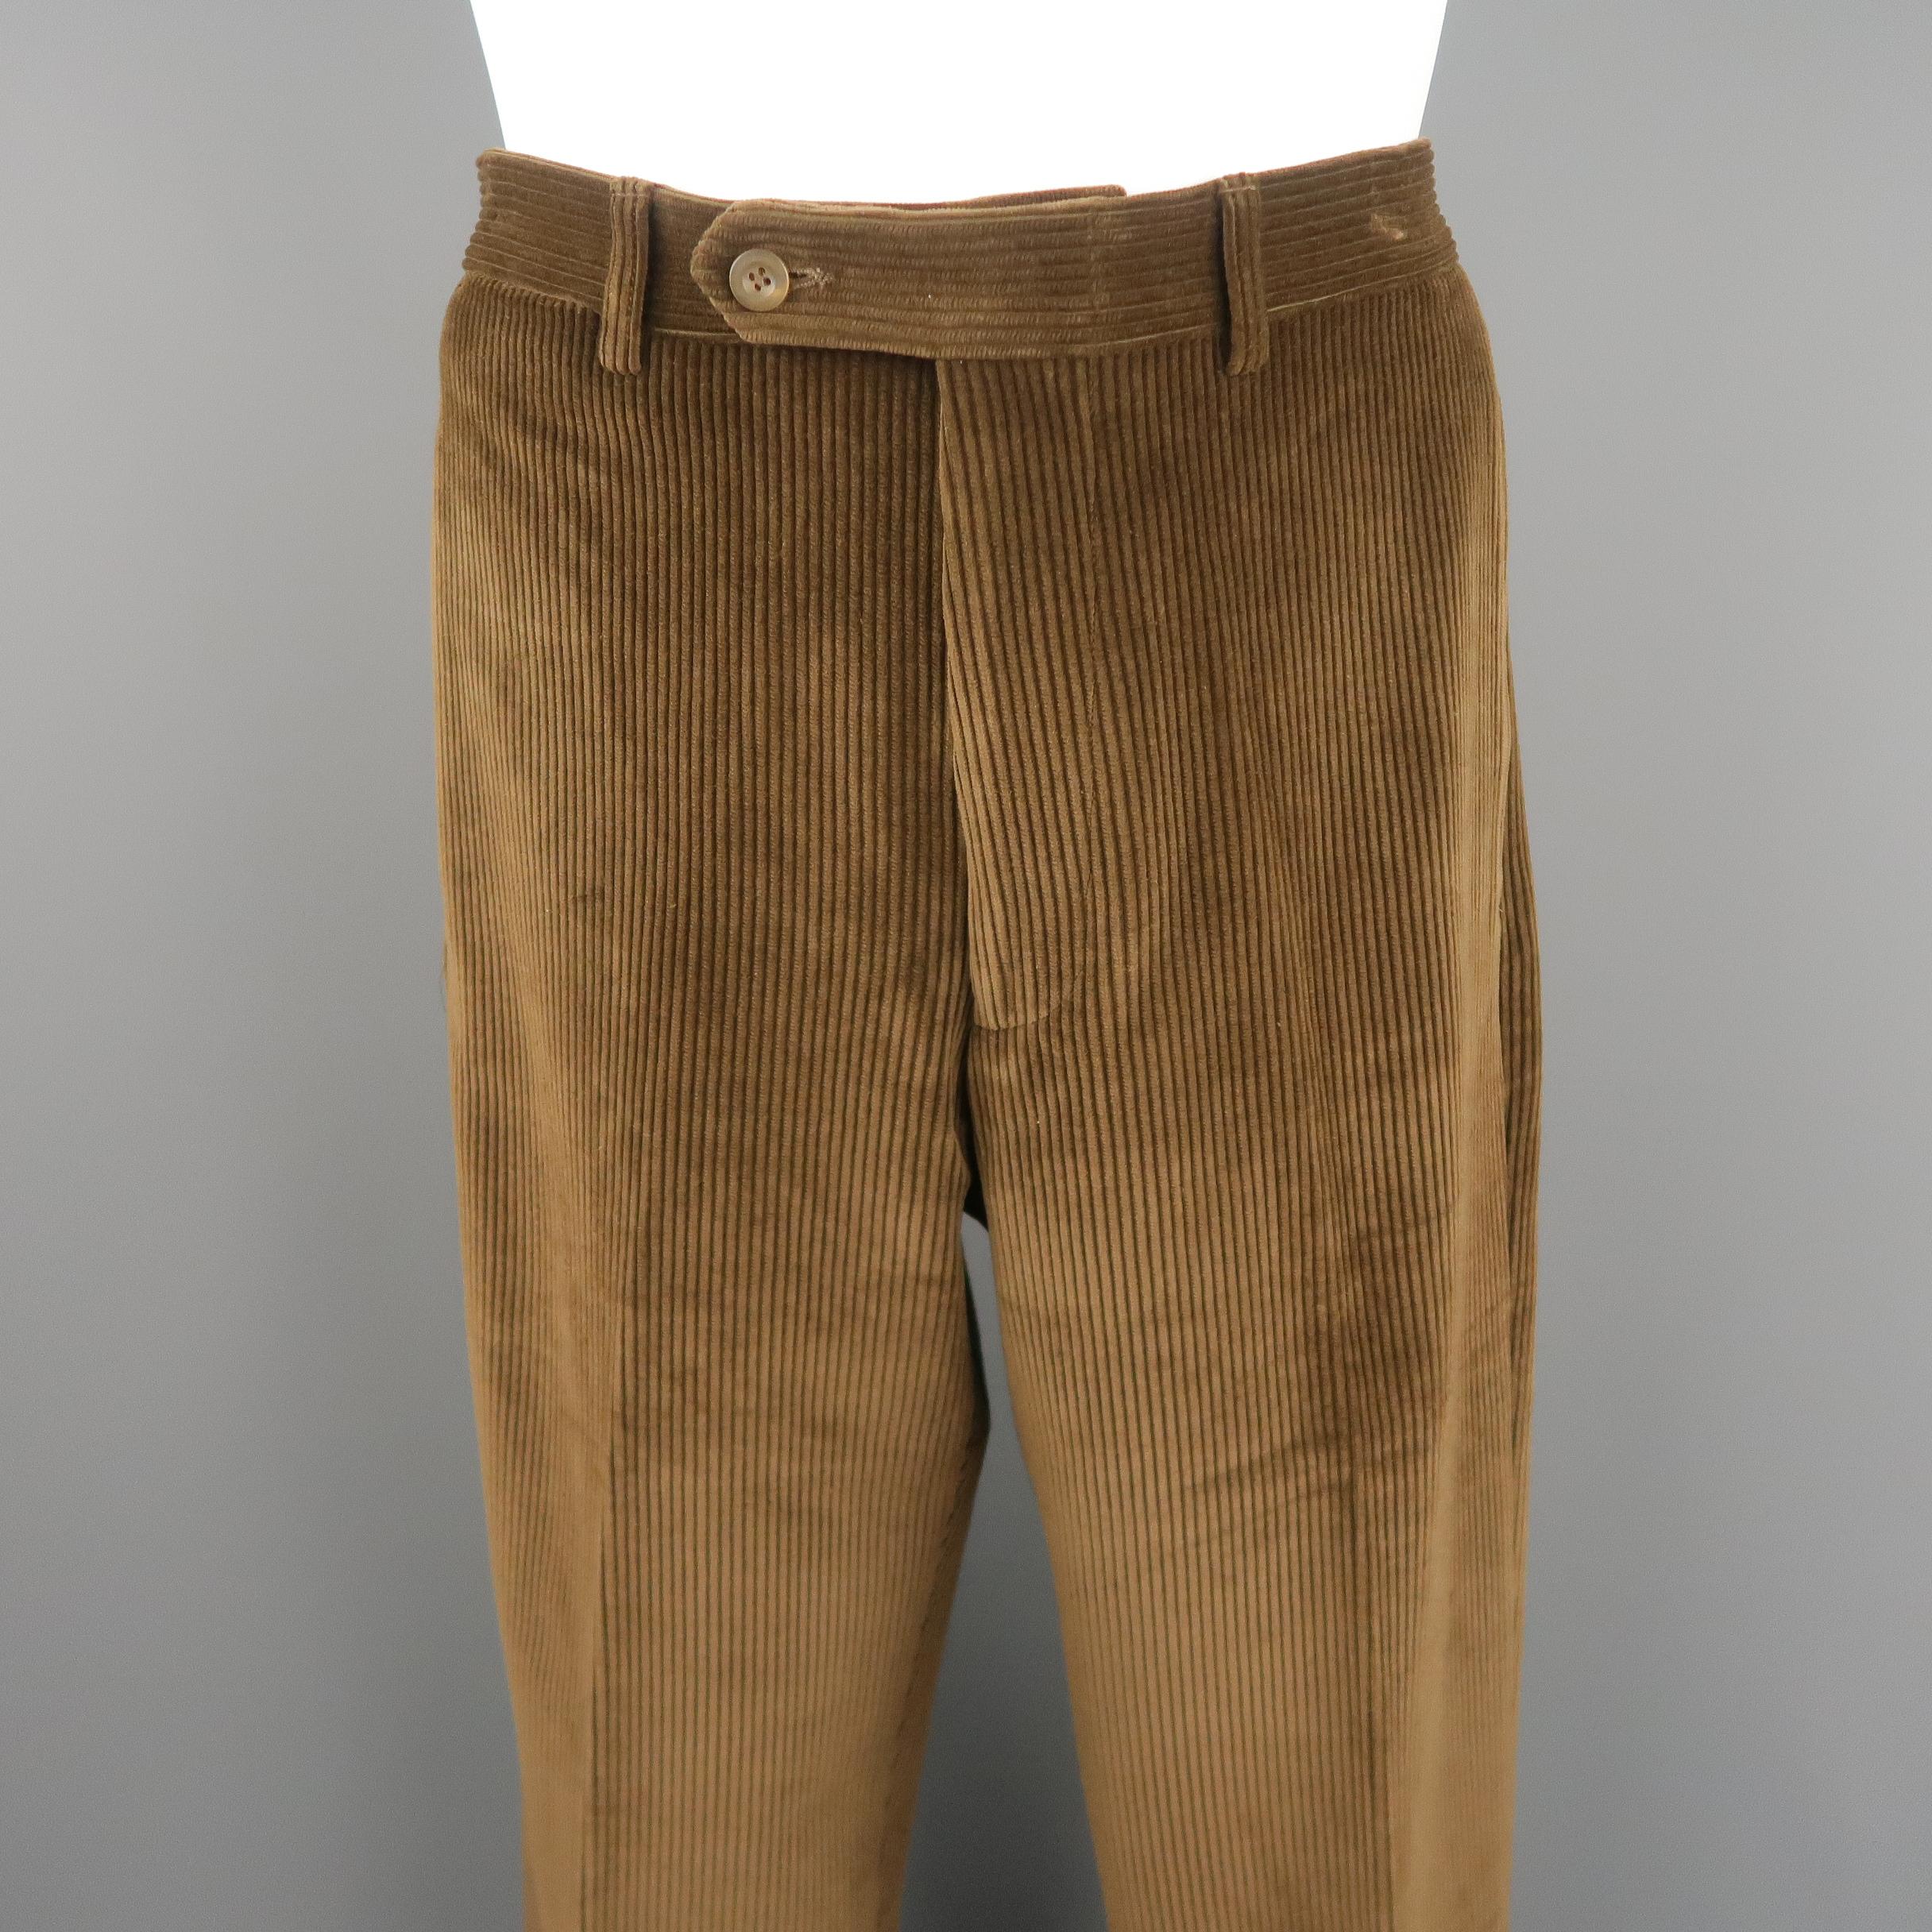 ERMENEGILDO ZEGNA pants come in tan brown corduroy with a tab closure waistband and classic fit. Unhemmed.
 
Very Good Pre-Owned Condition.
Marked: 31
 
Measurements:
 
Waist: 32 in.
Rise: 11.5 in.
Inseam:  36 in.